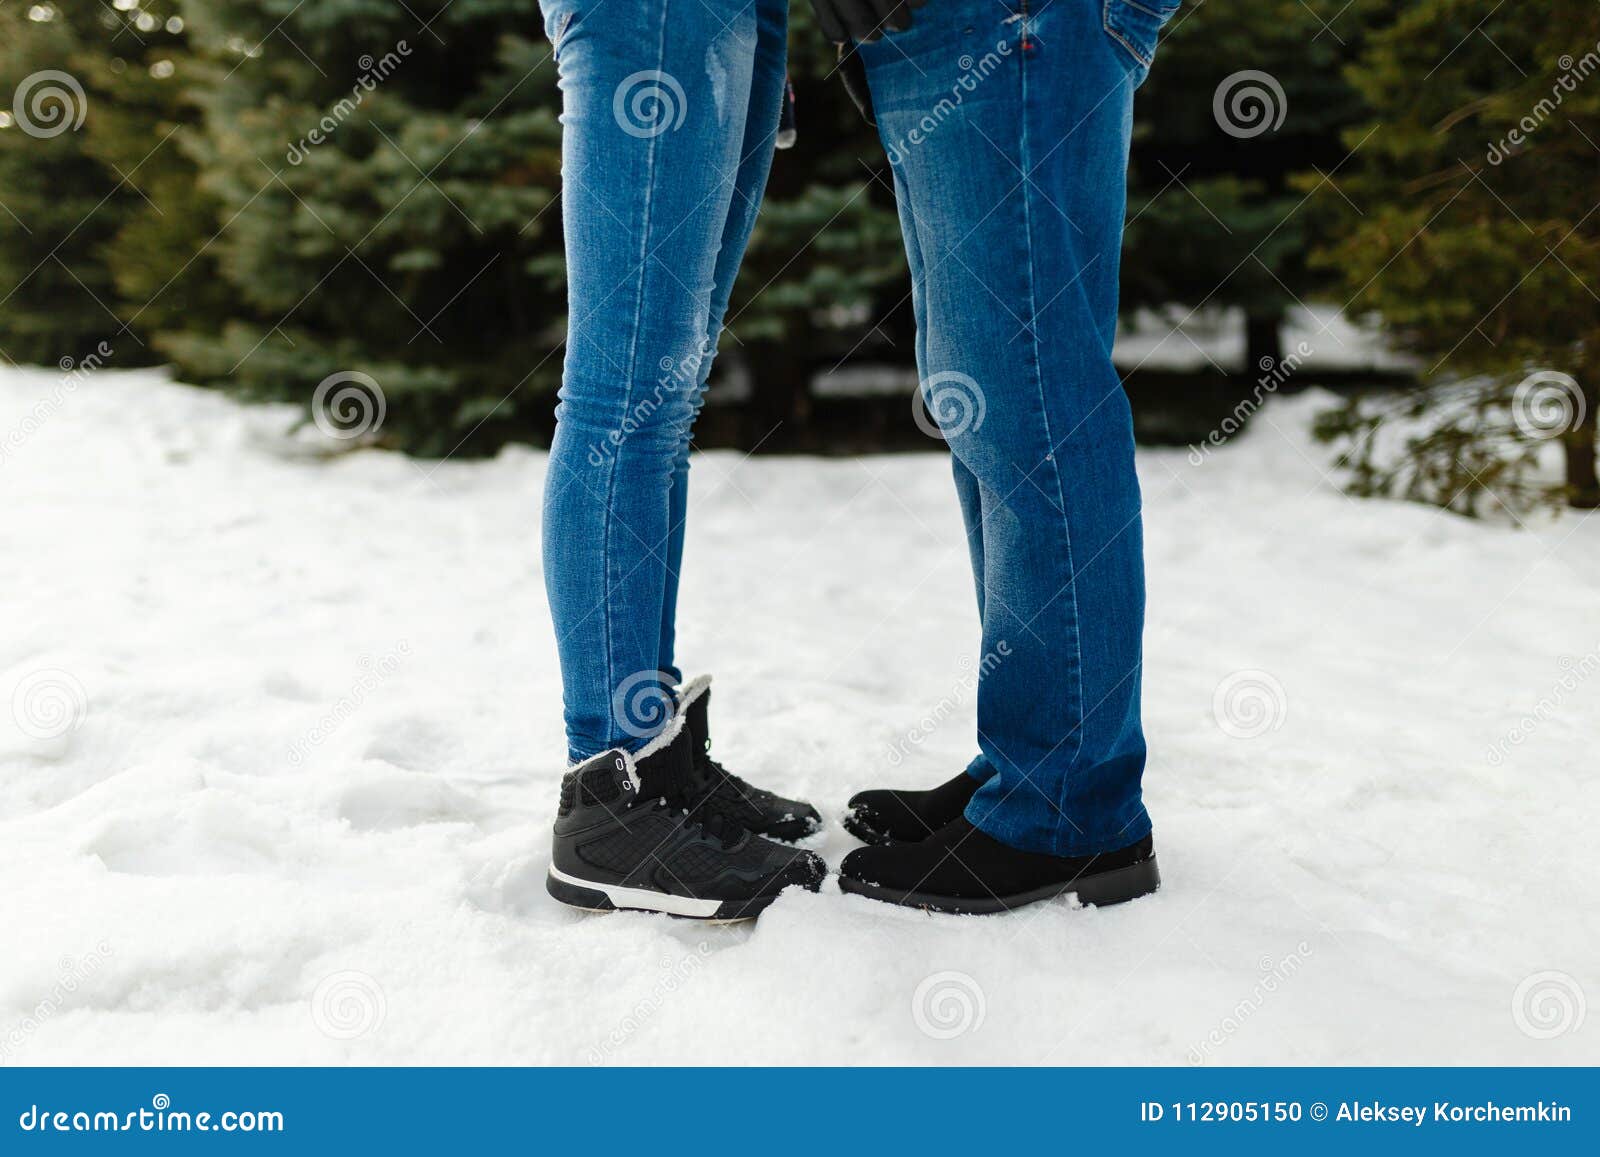 warm winter shoes